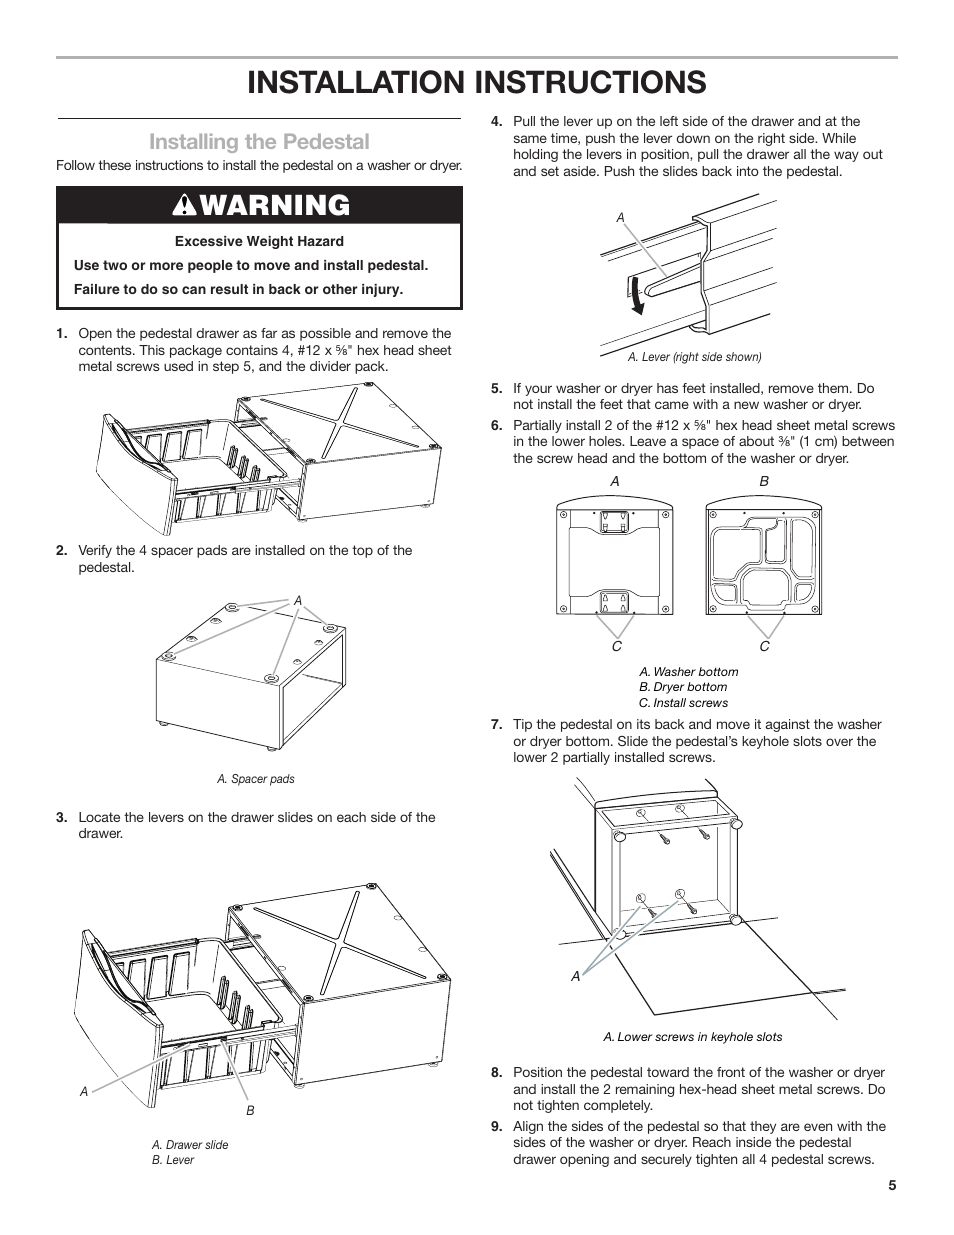 Installation Instructions, Warning, Installing The Pedestal | Whirlpool  Washer/Dryer Pedestal User Manual | Page 5 / 24